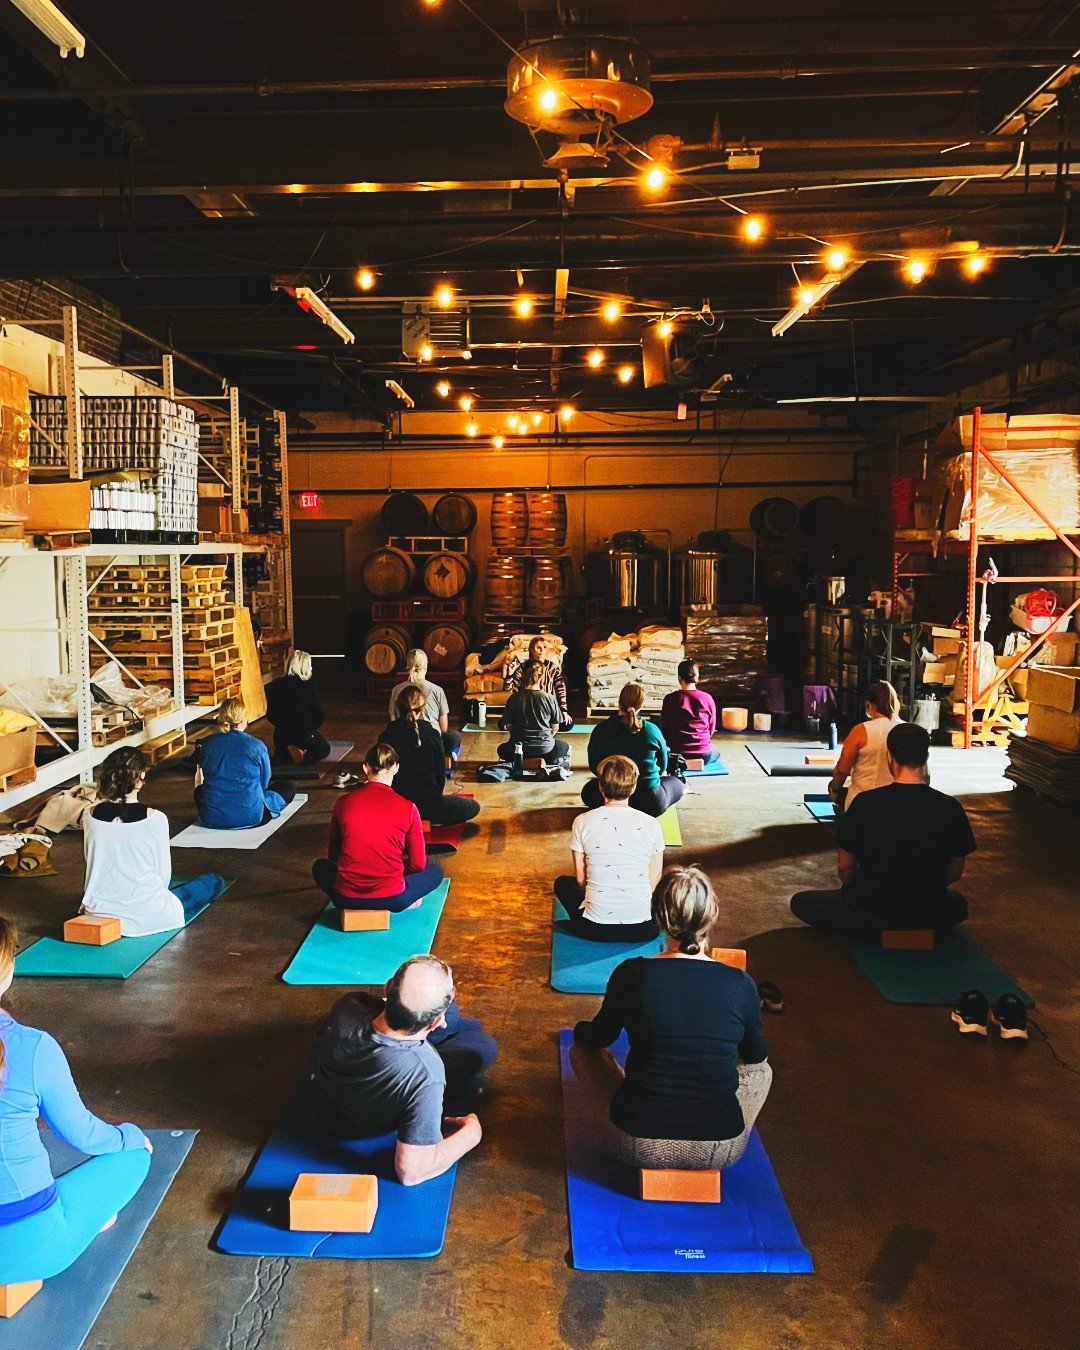 🔗 Hit the link in our bio for tickets &amp; details for the events below ⤵️

🧘&zwj;♀️Temperance Trikonasana: Drink Beer. Do Good. 🎪
Life feeling like a circus? Stretch out with yoga and a beer on Saturday, May 18th, from 1-2:45 pm with Jenny Arrin